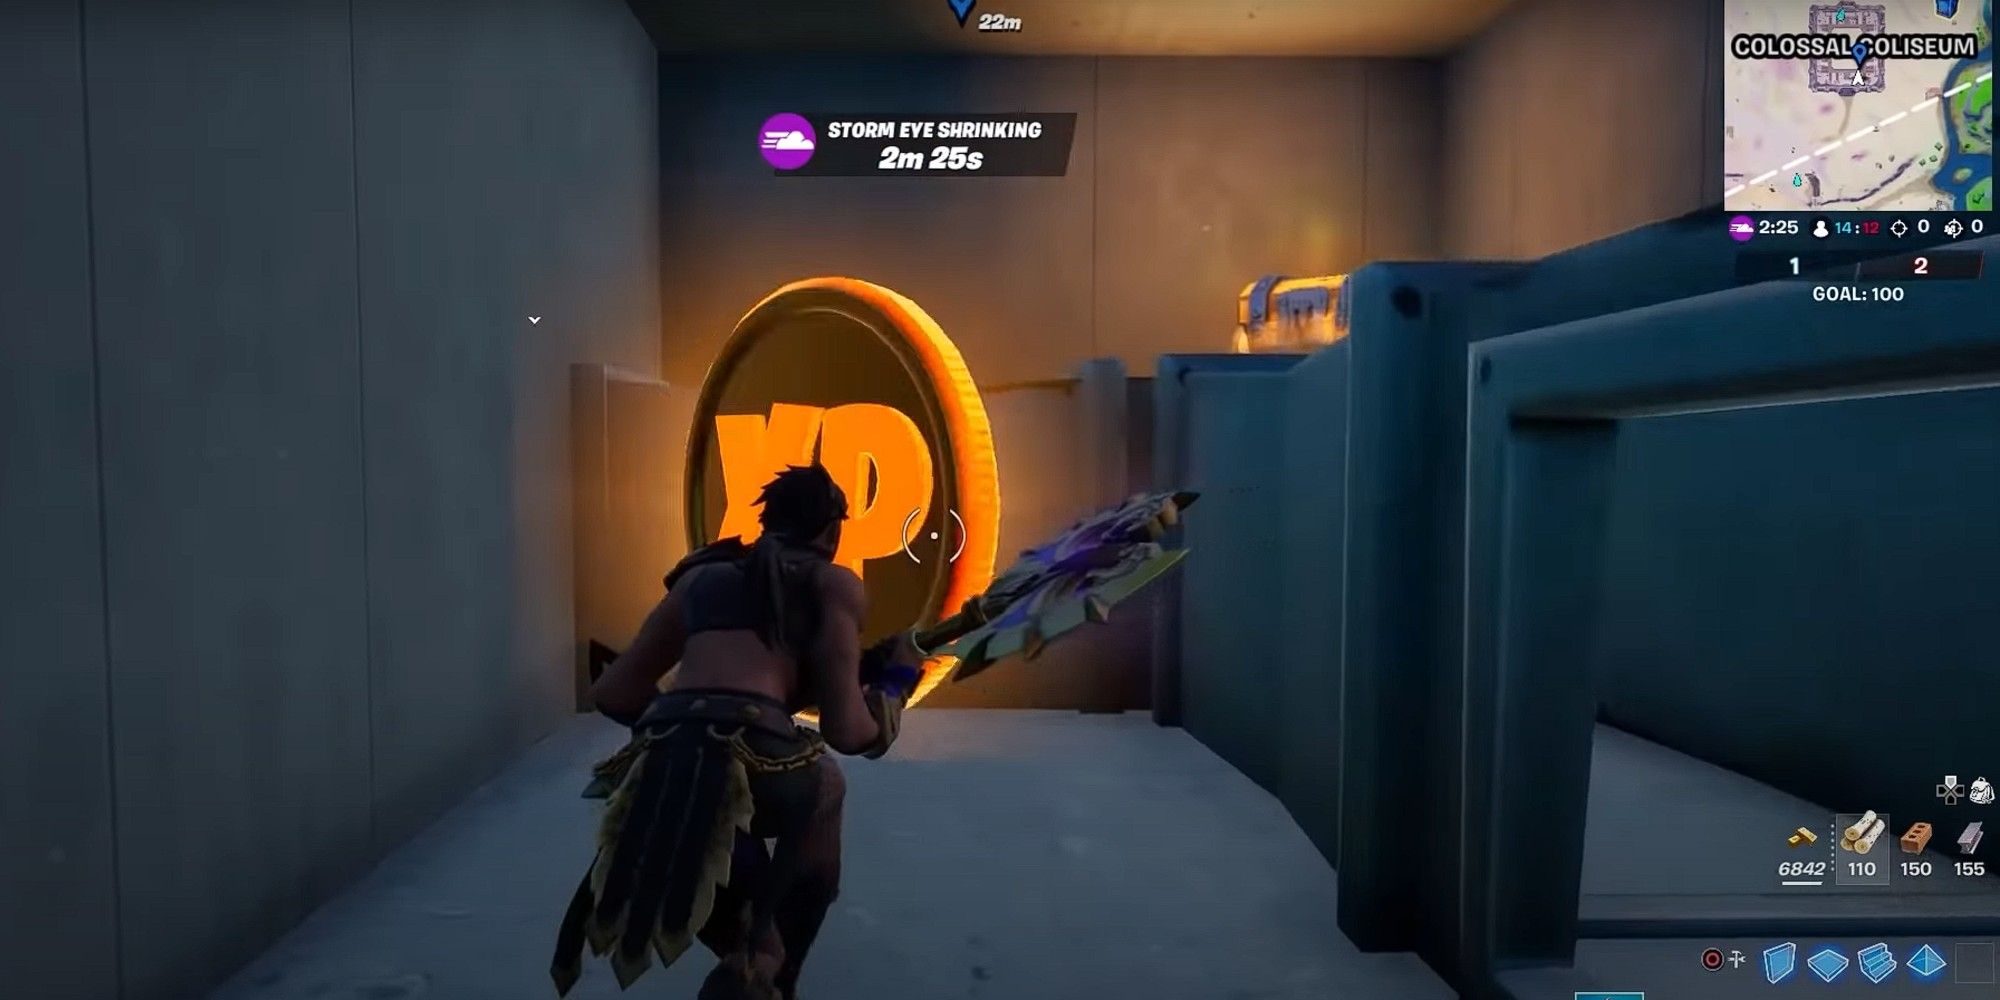 A player finds the Week 13 Gold XP Coin in the vent at Colossal Coliseum in Fortnite